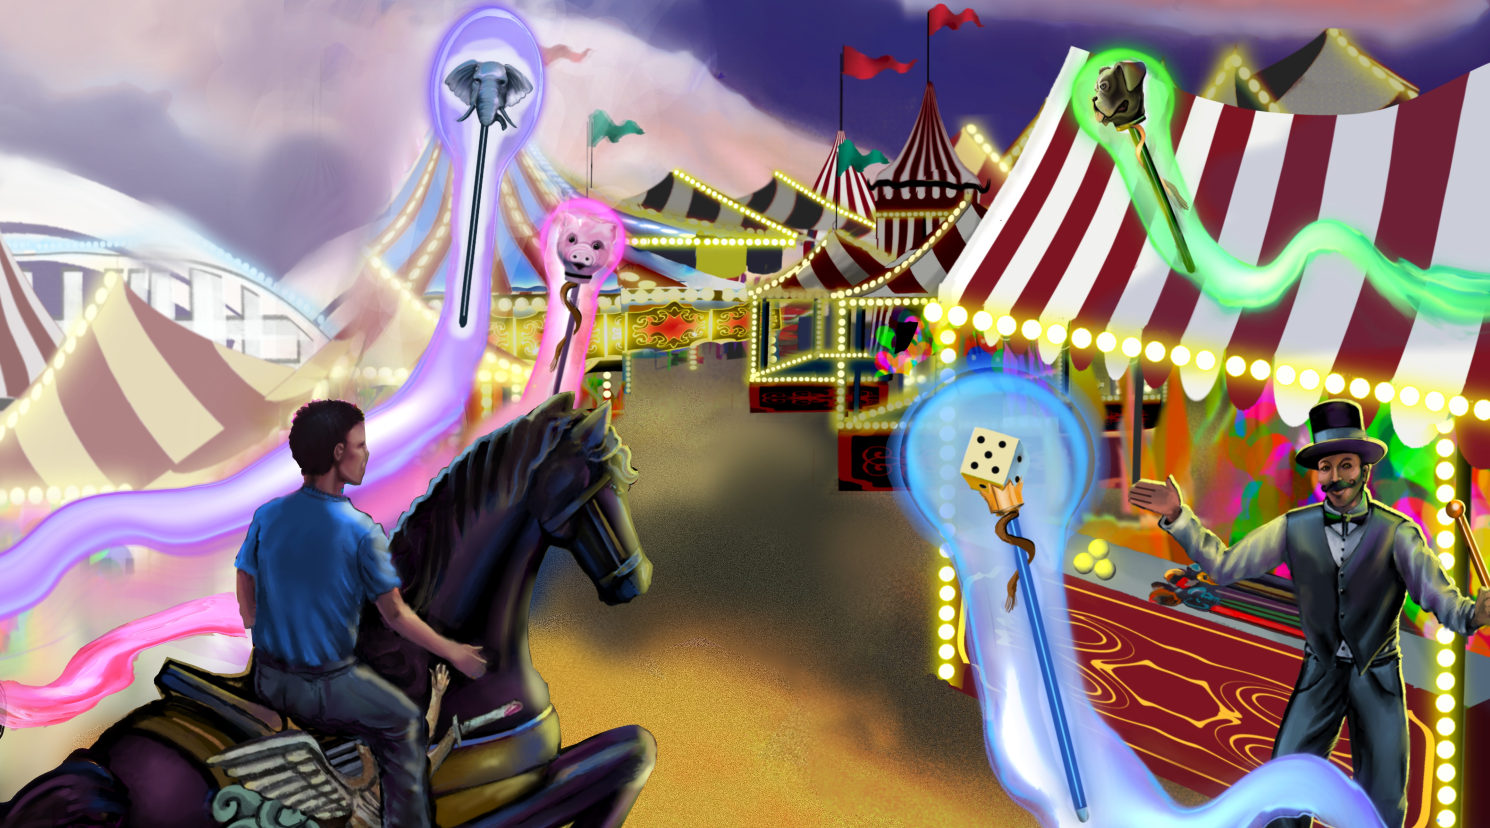 “Wow!” the boy exclaims as he slides off the Carousel Horse.<br /><br />The other Canes float to the Young Lad, all emanating dazzling and shimmering light. He can feel that they are full of happiness and joyfulness. The Canes seem limitless, and somehow divine, to the Young Lad.